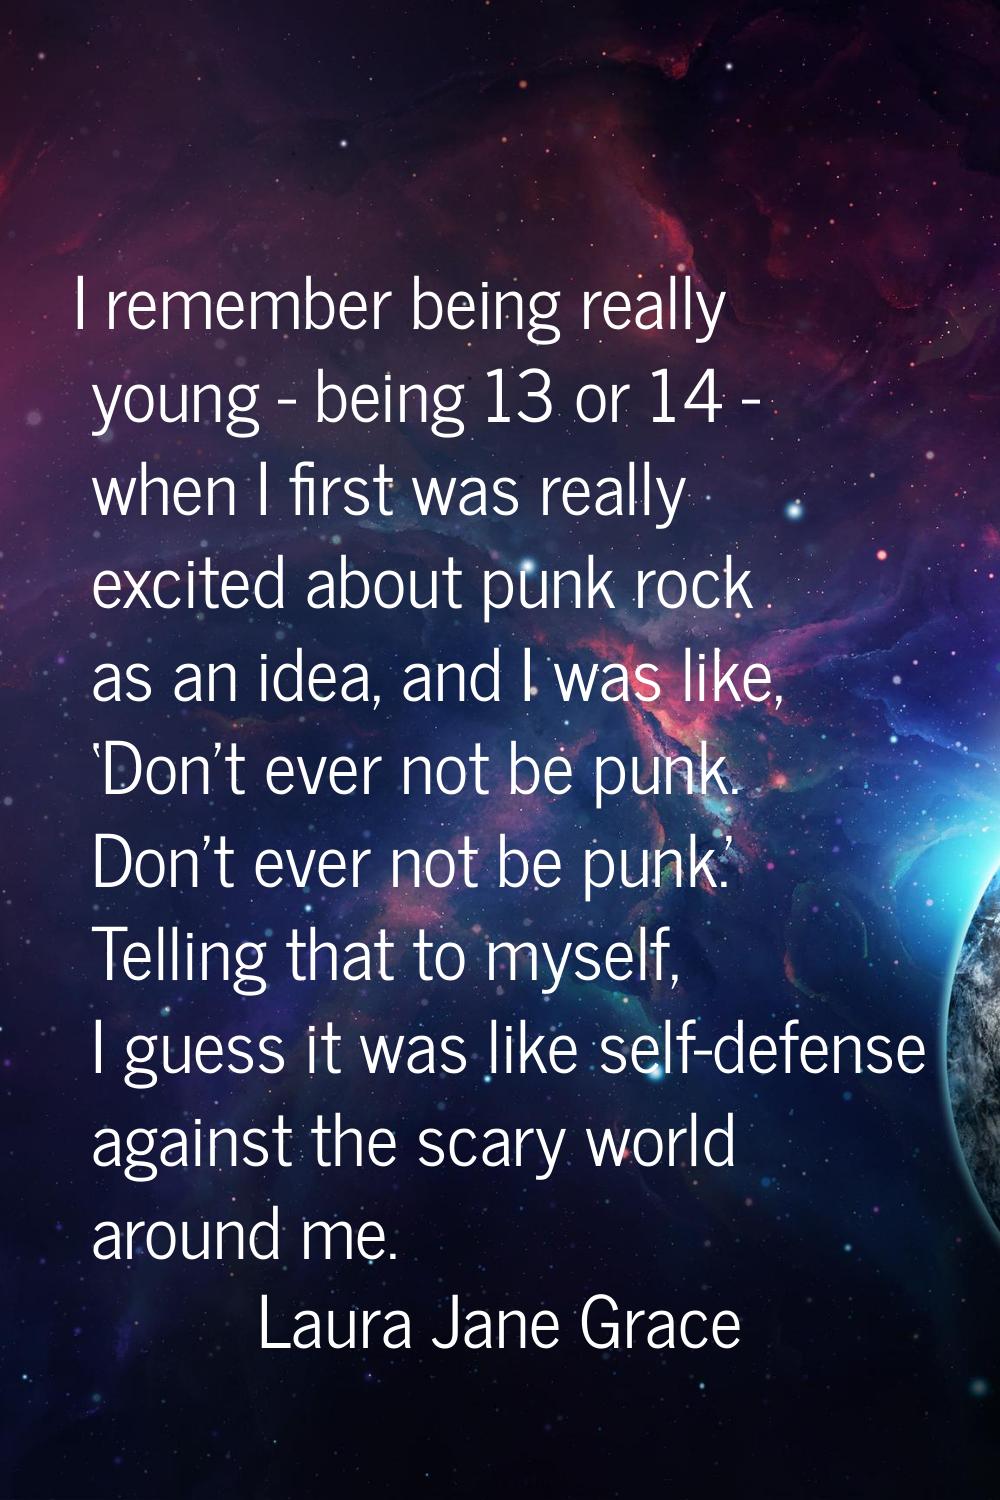 I remember being really young - being 13 or 14 - when I first was really excited about punk rock as